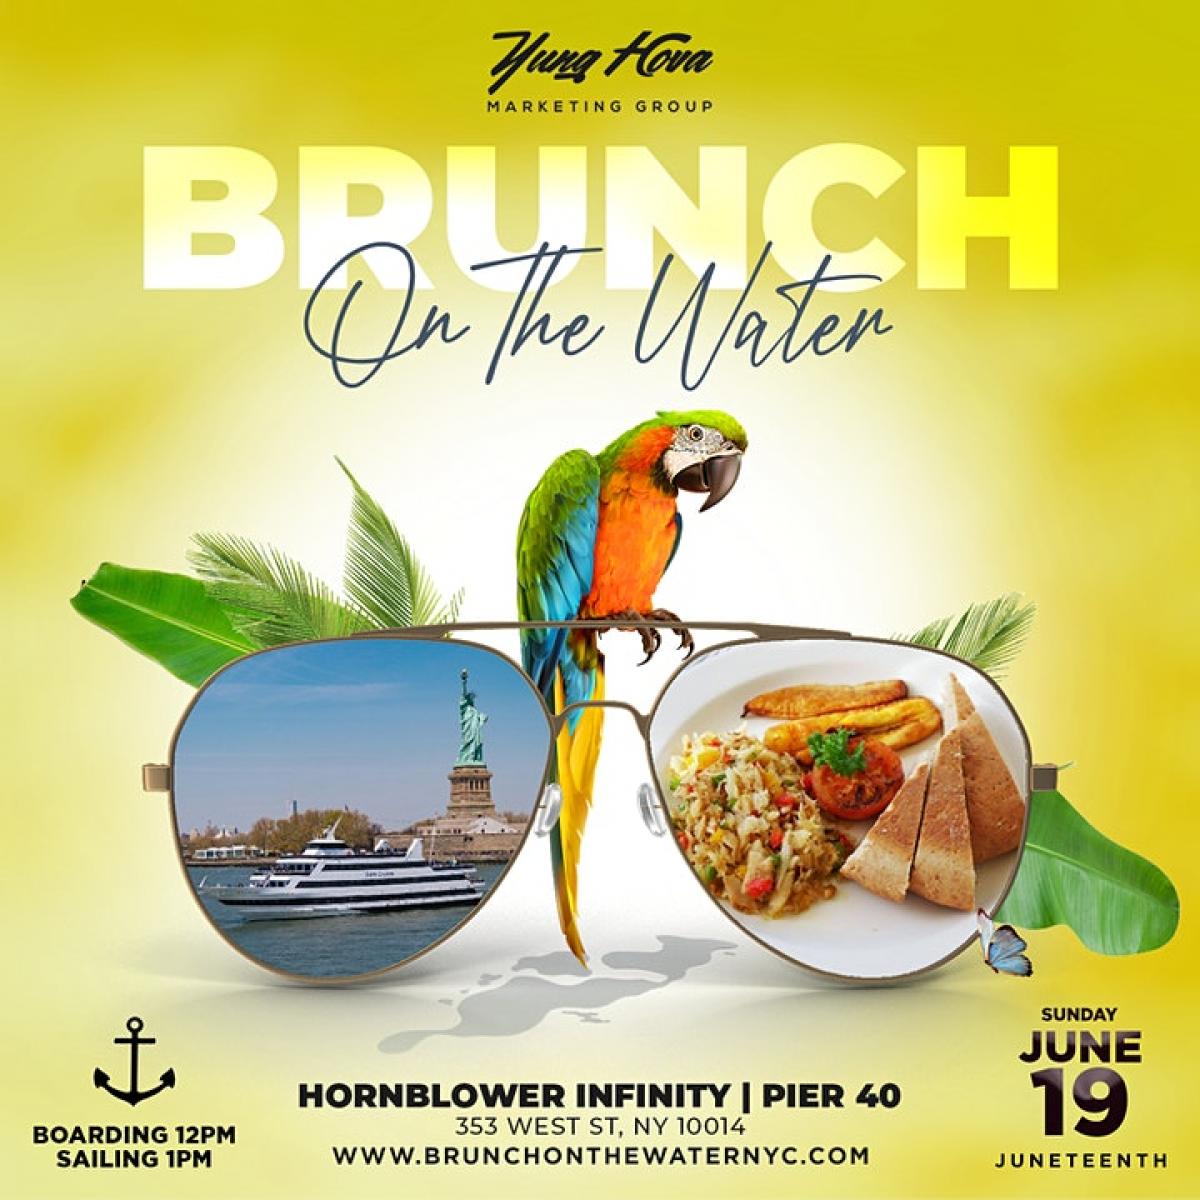 Brunch On The Water NYC flyer or graphic.